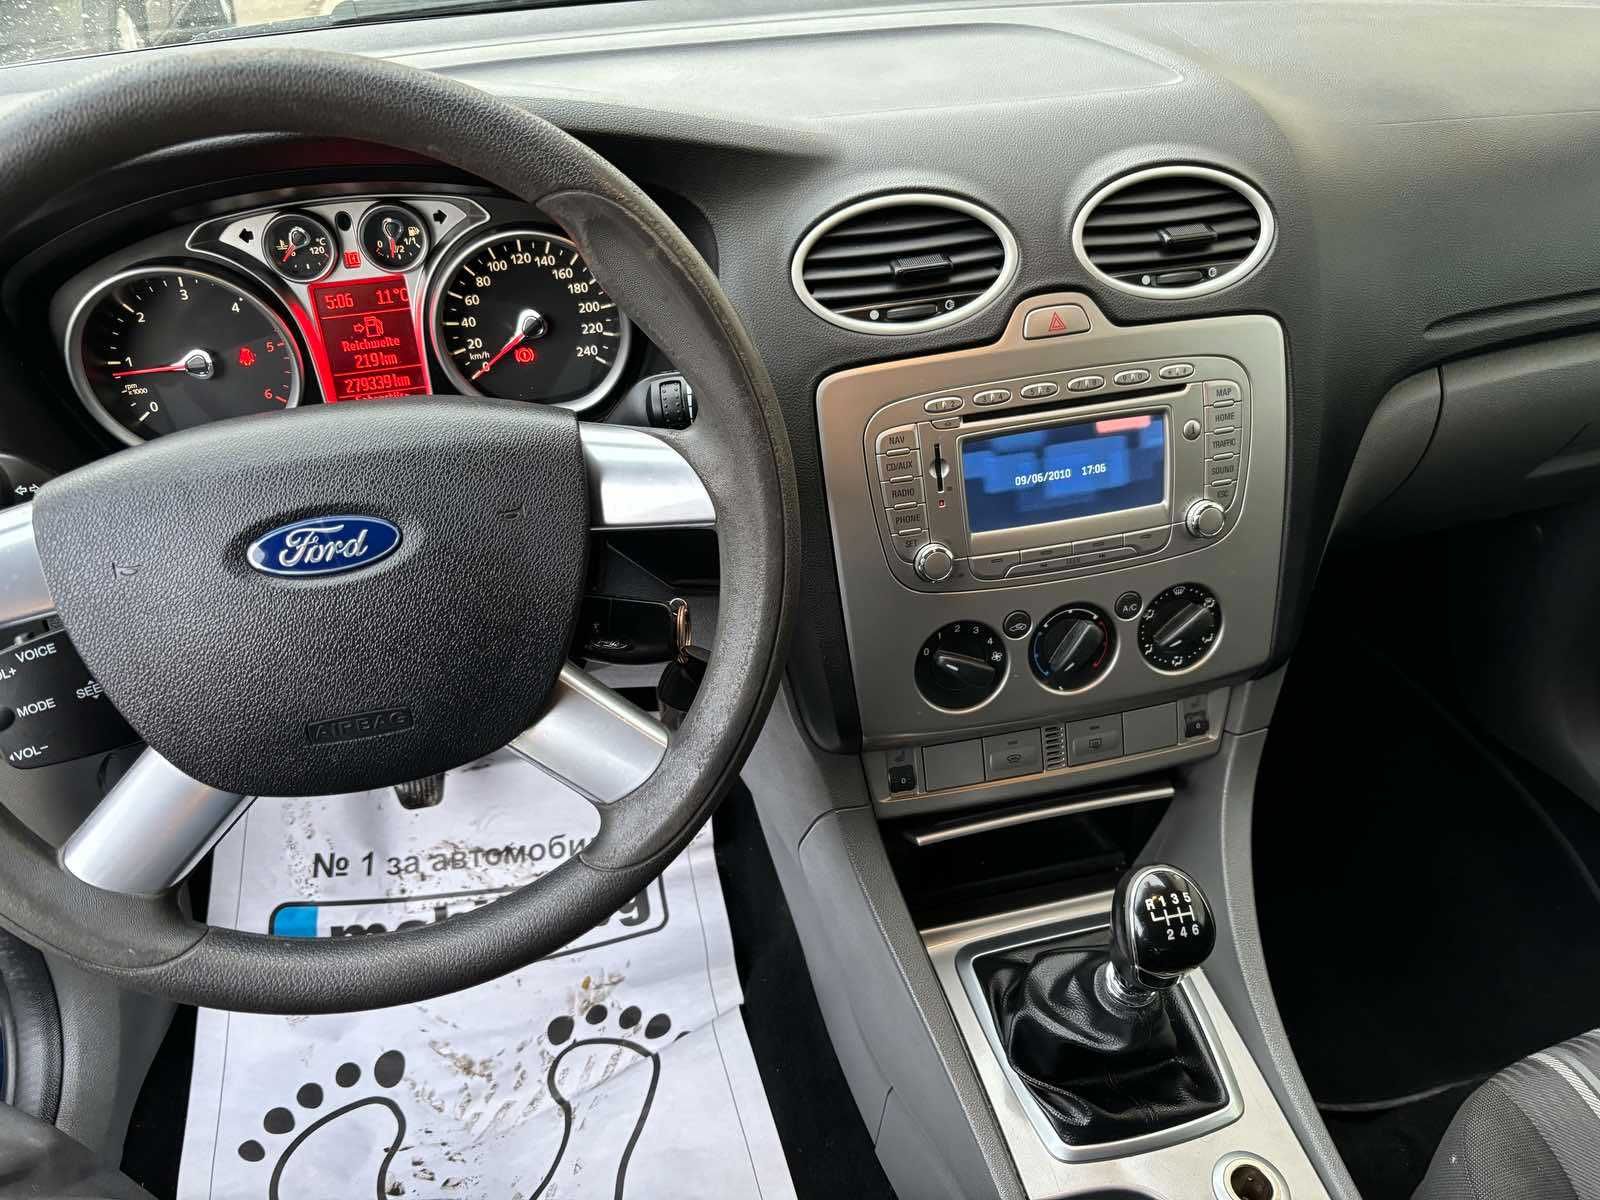 Ford Focus 2.0hdi / Форд Фокус 2009